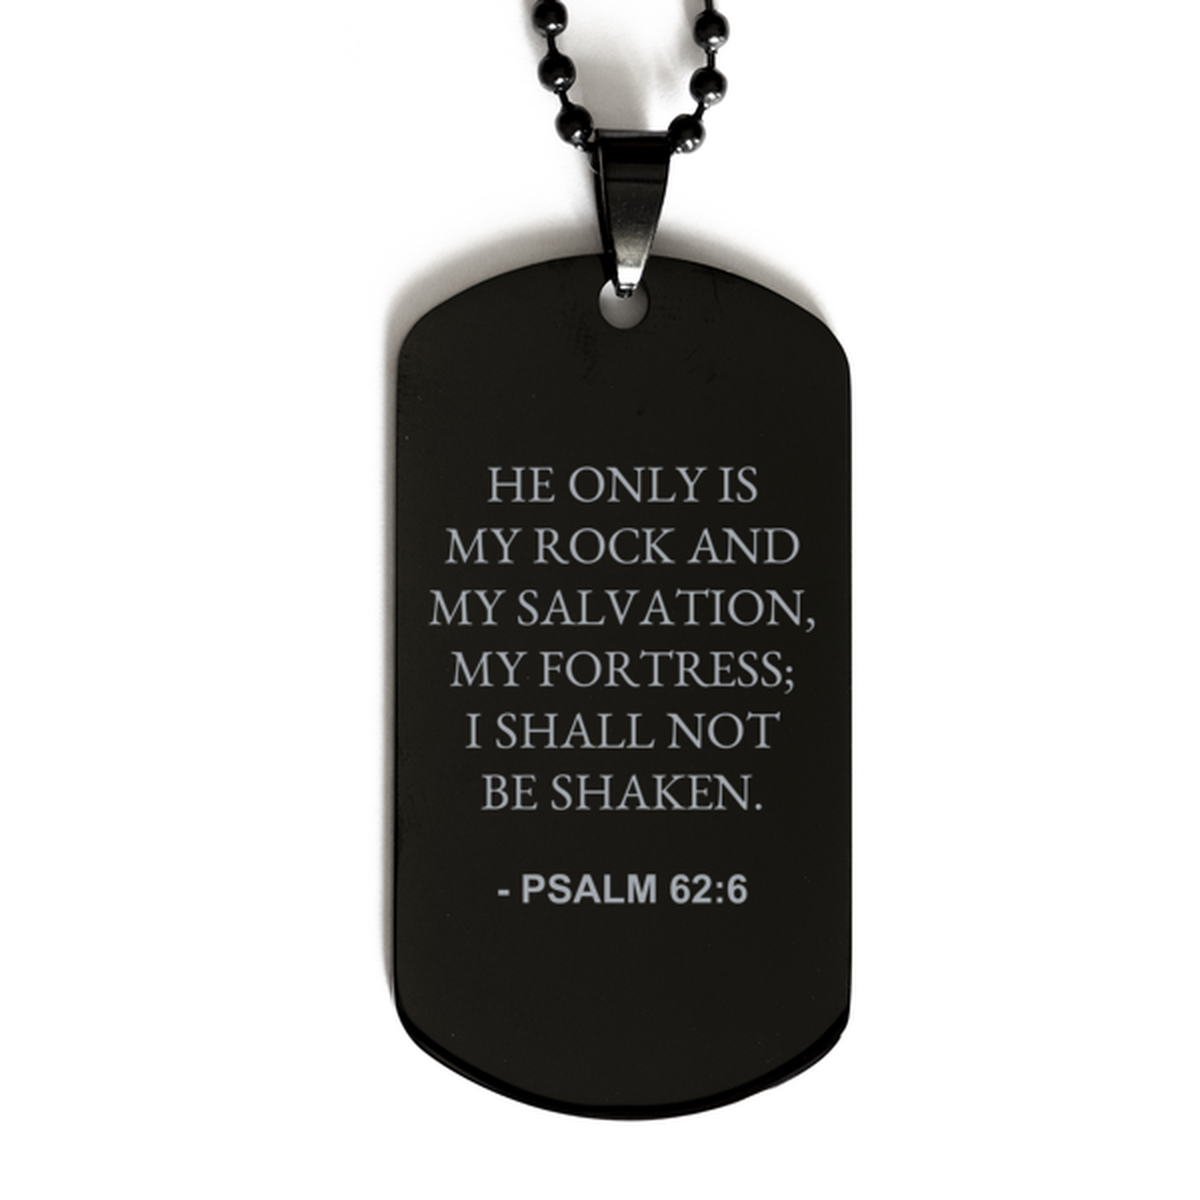 Bible Verse Black Dog Tag, Psalm 62:6 He Only Is My Rock And My Salvation My Fortress;, Christian Inspirational Necklace Gifts For Men Women